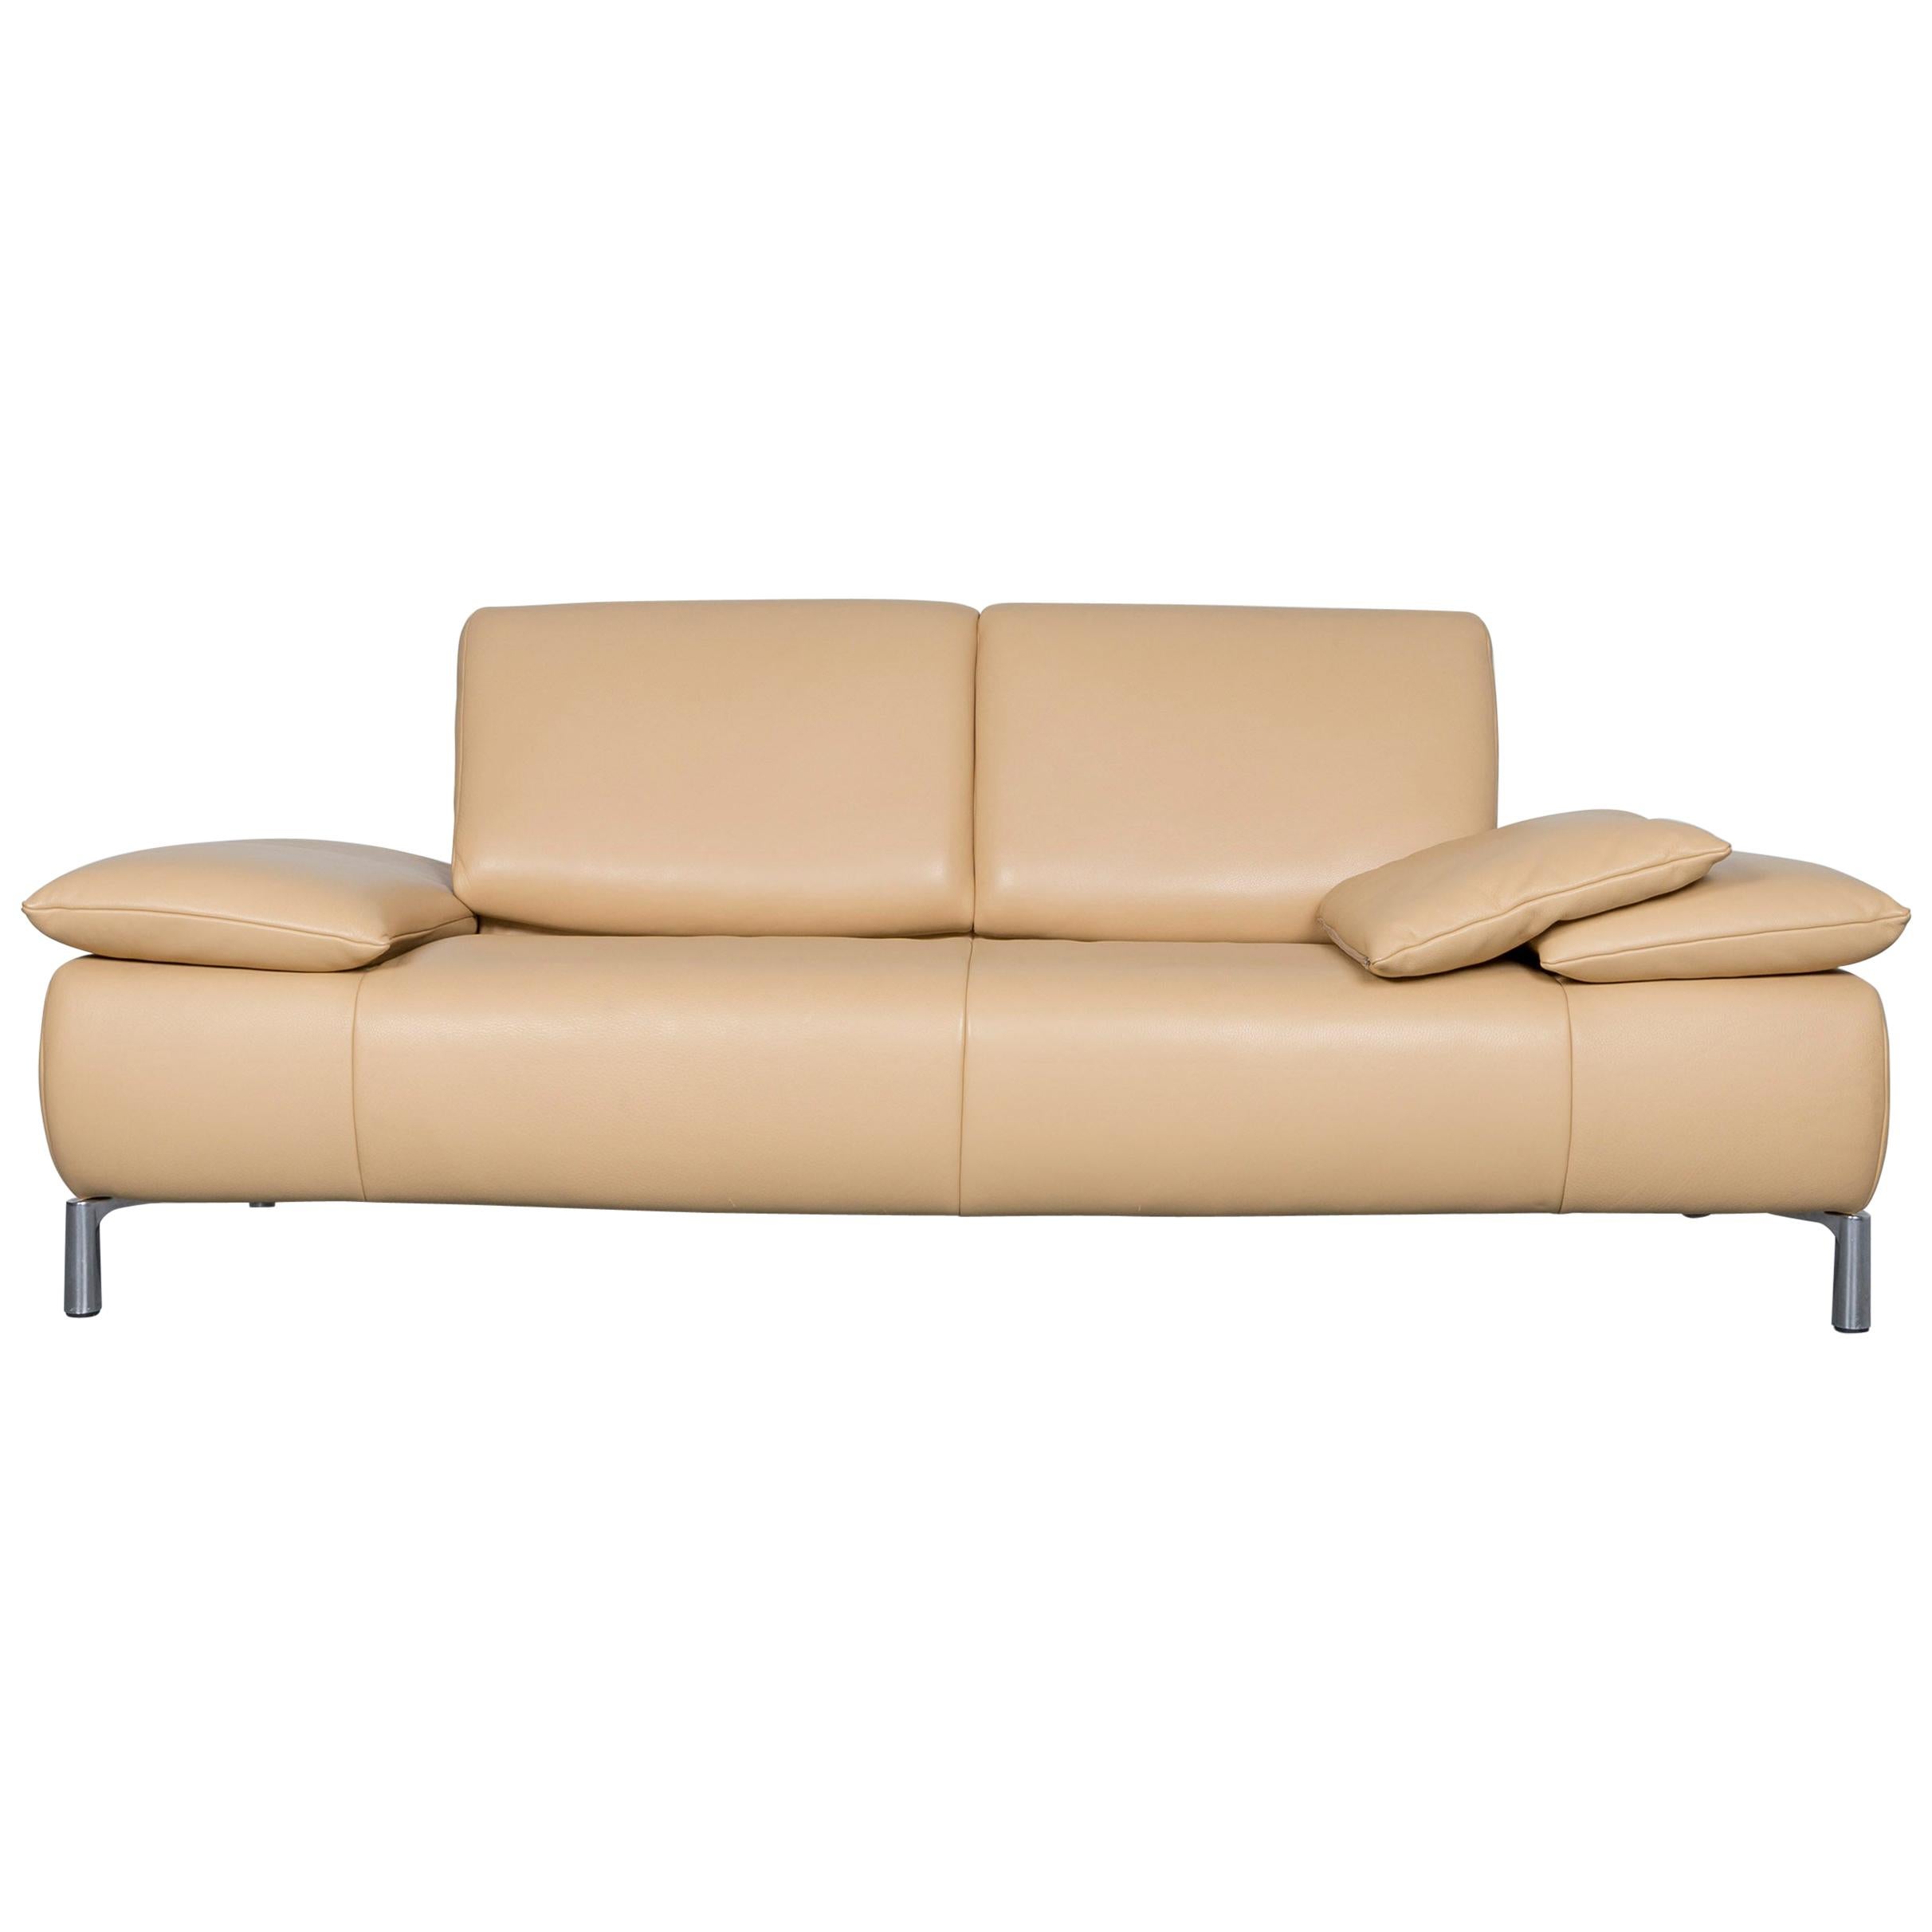 Koinor Koya Designer Leather Sofa Beige Real Leather Couch For Sale